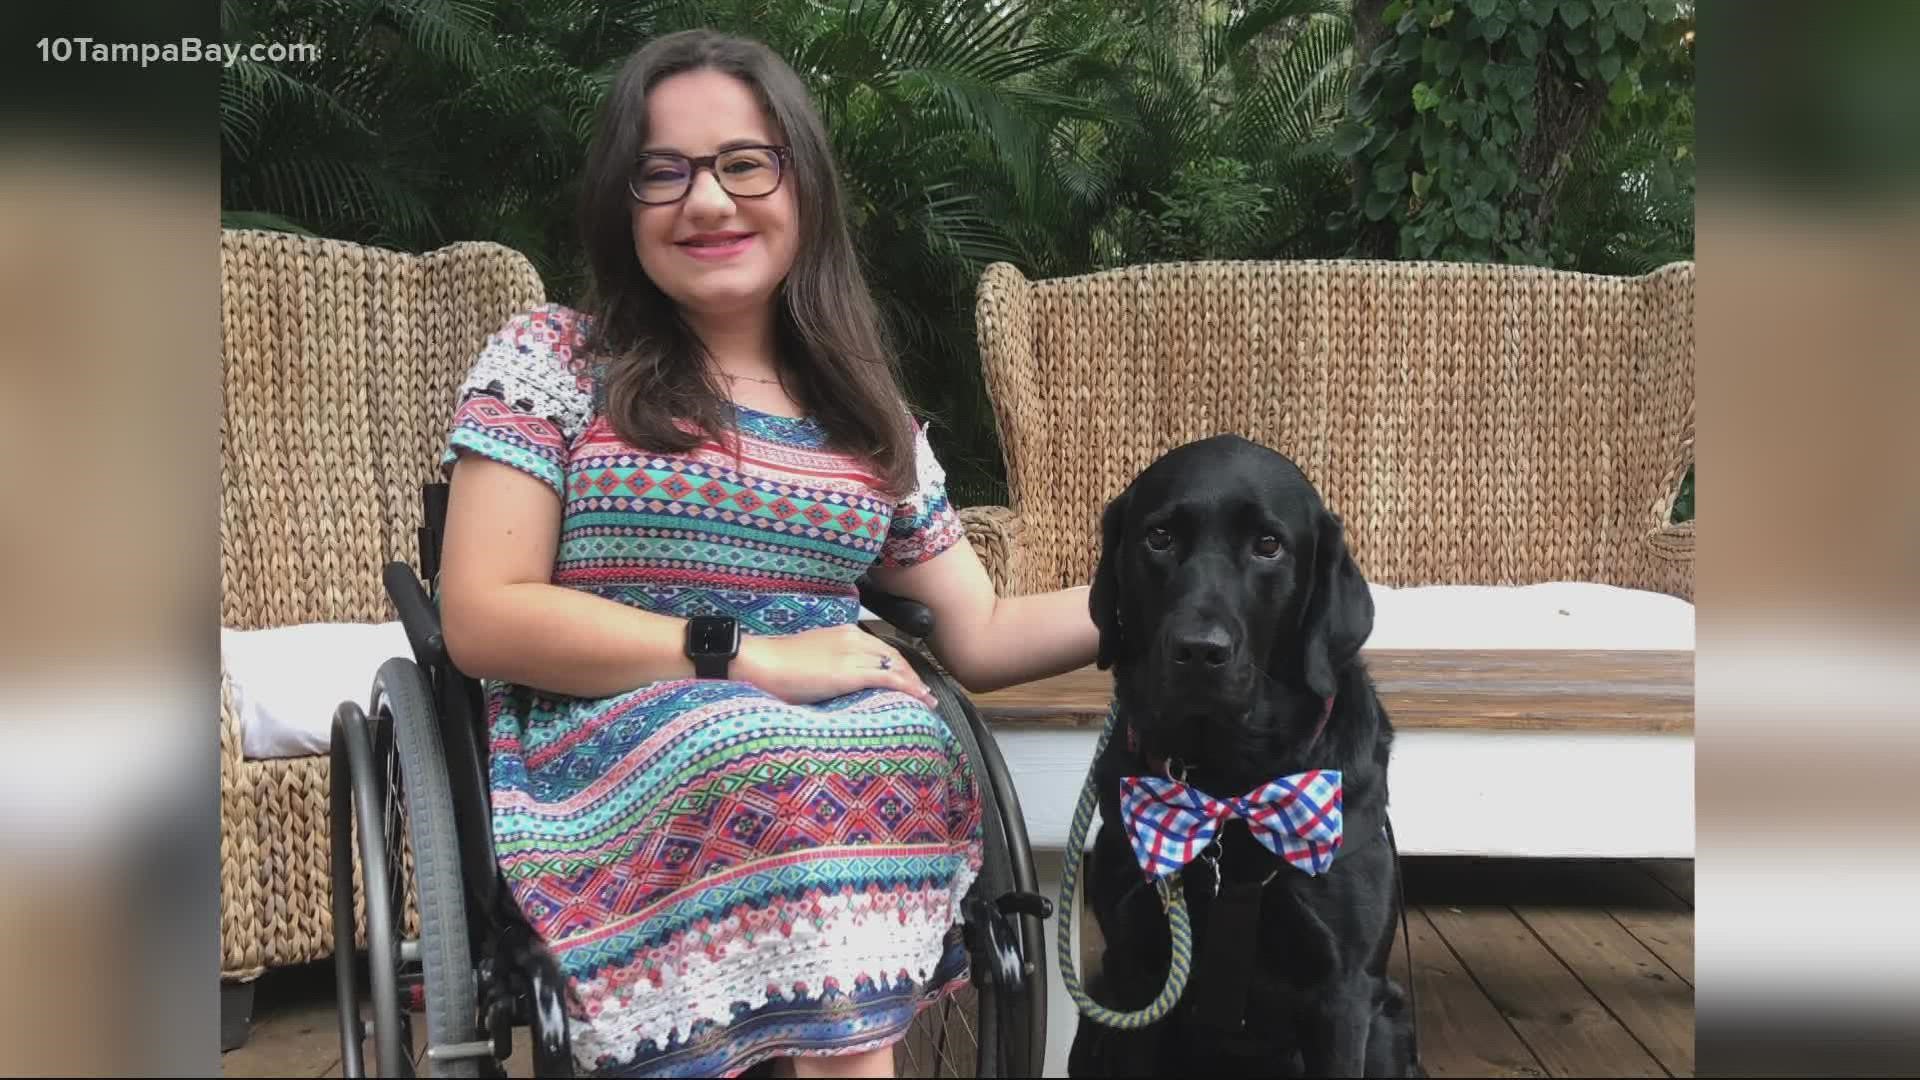 21-year-old Leigh Dittman will graduate from the University of Tampa nursing program on May 7 with honors. Her service dog, Nerf, will walk alongside her.